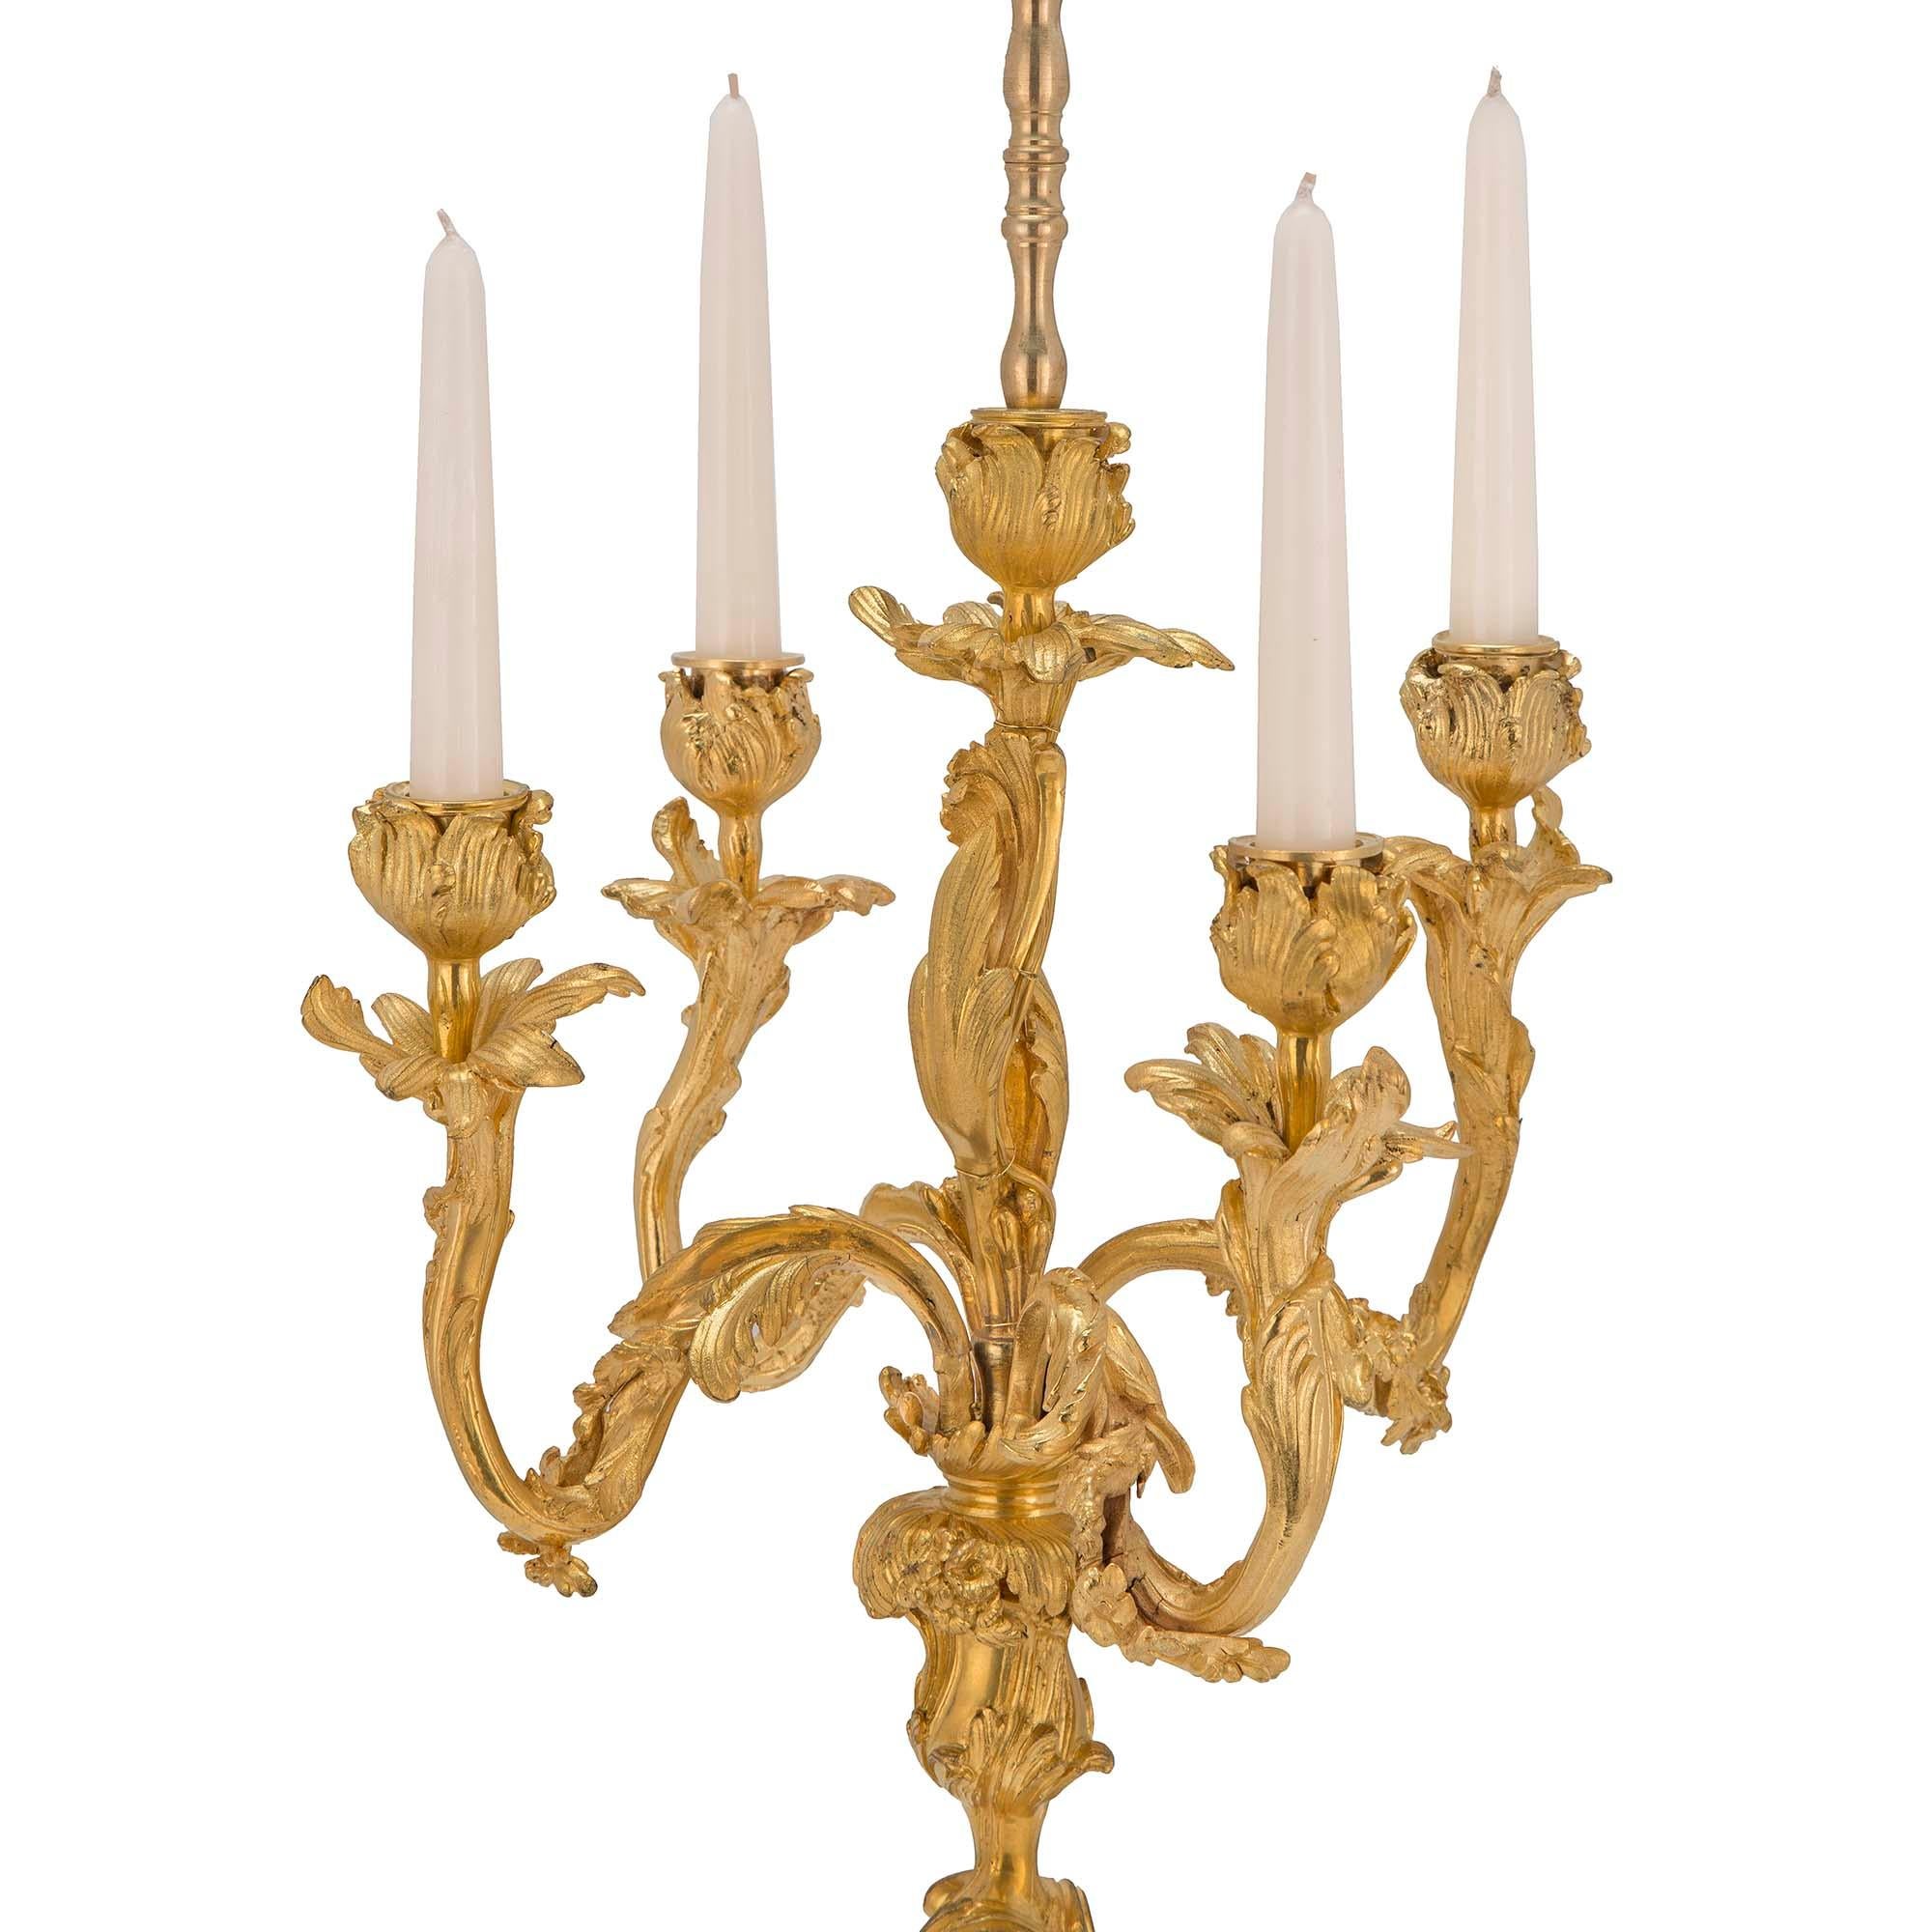 A lovely pair of French 19th century Louis XV st. ormolu candelabra lamps. Each lamp is raised on rectangular concave side feet, below the circular base. The base is accented with flowing scrolled acanthus leaves that continue up the fut to a flower